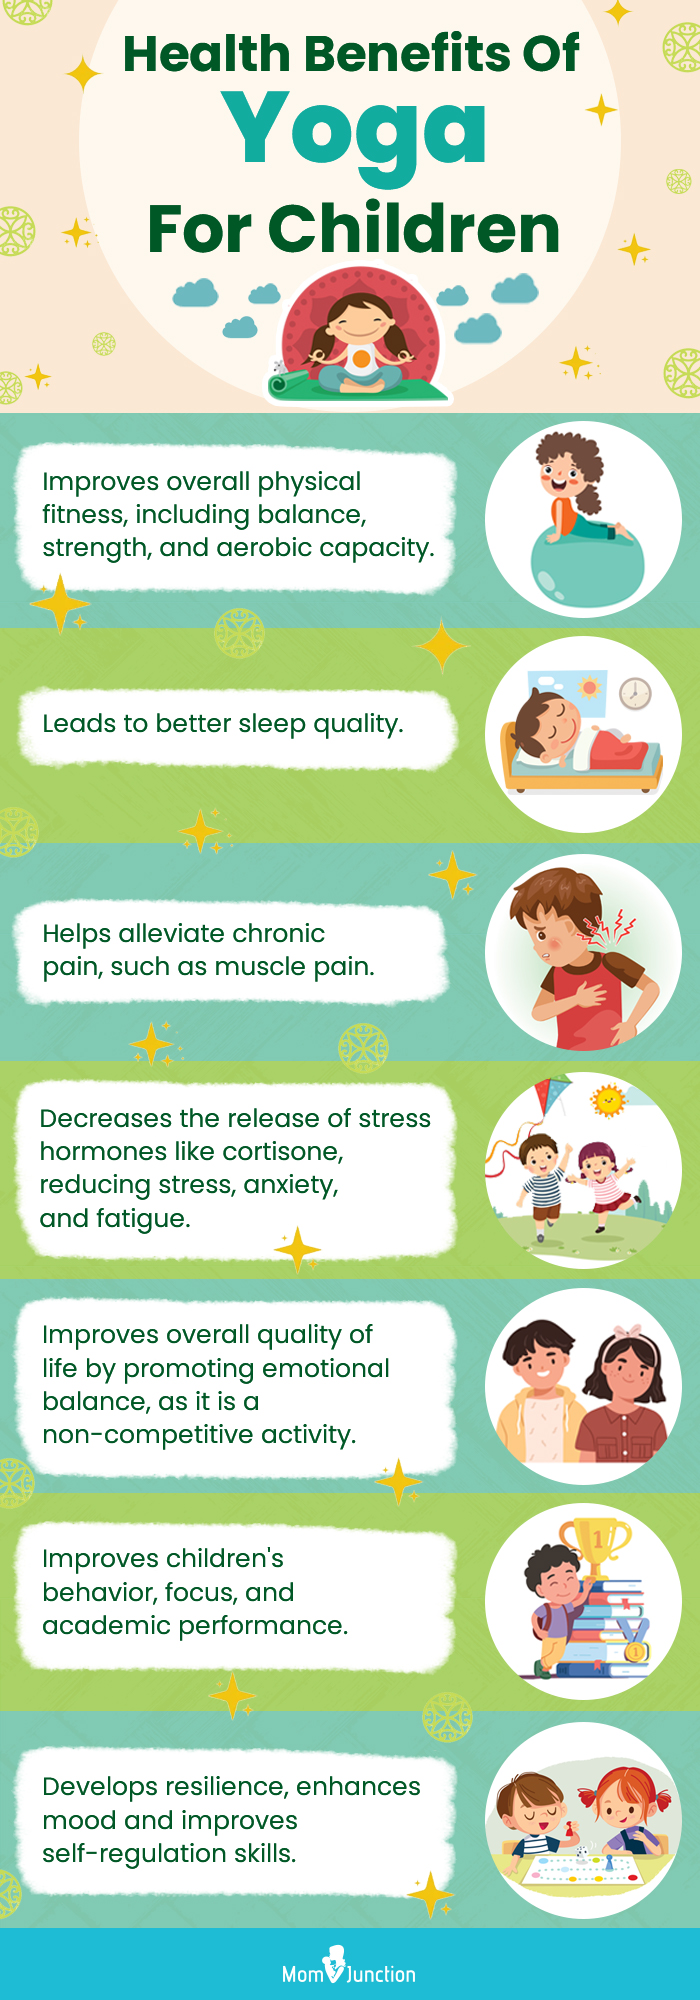 health benefits of yoga for children (infographic)